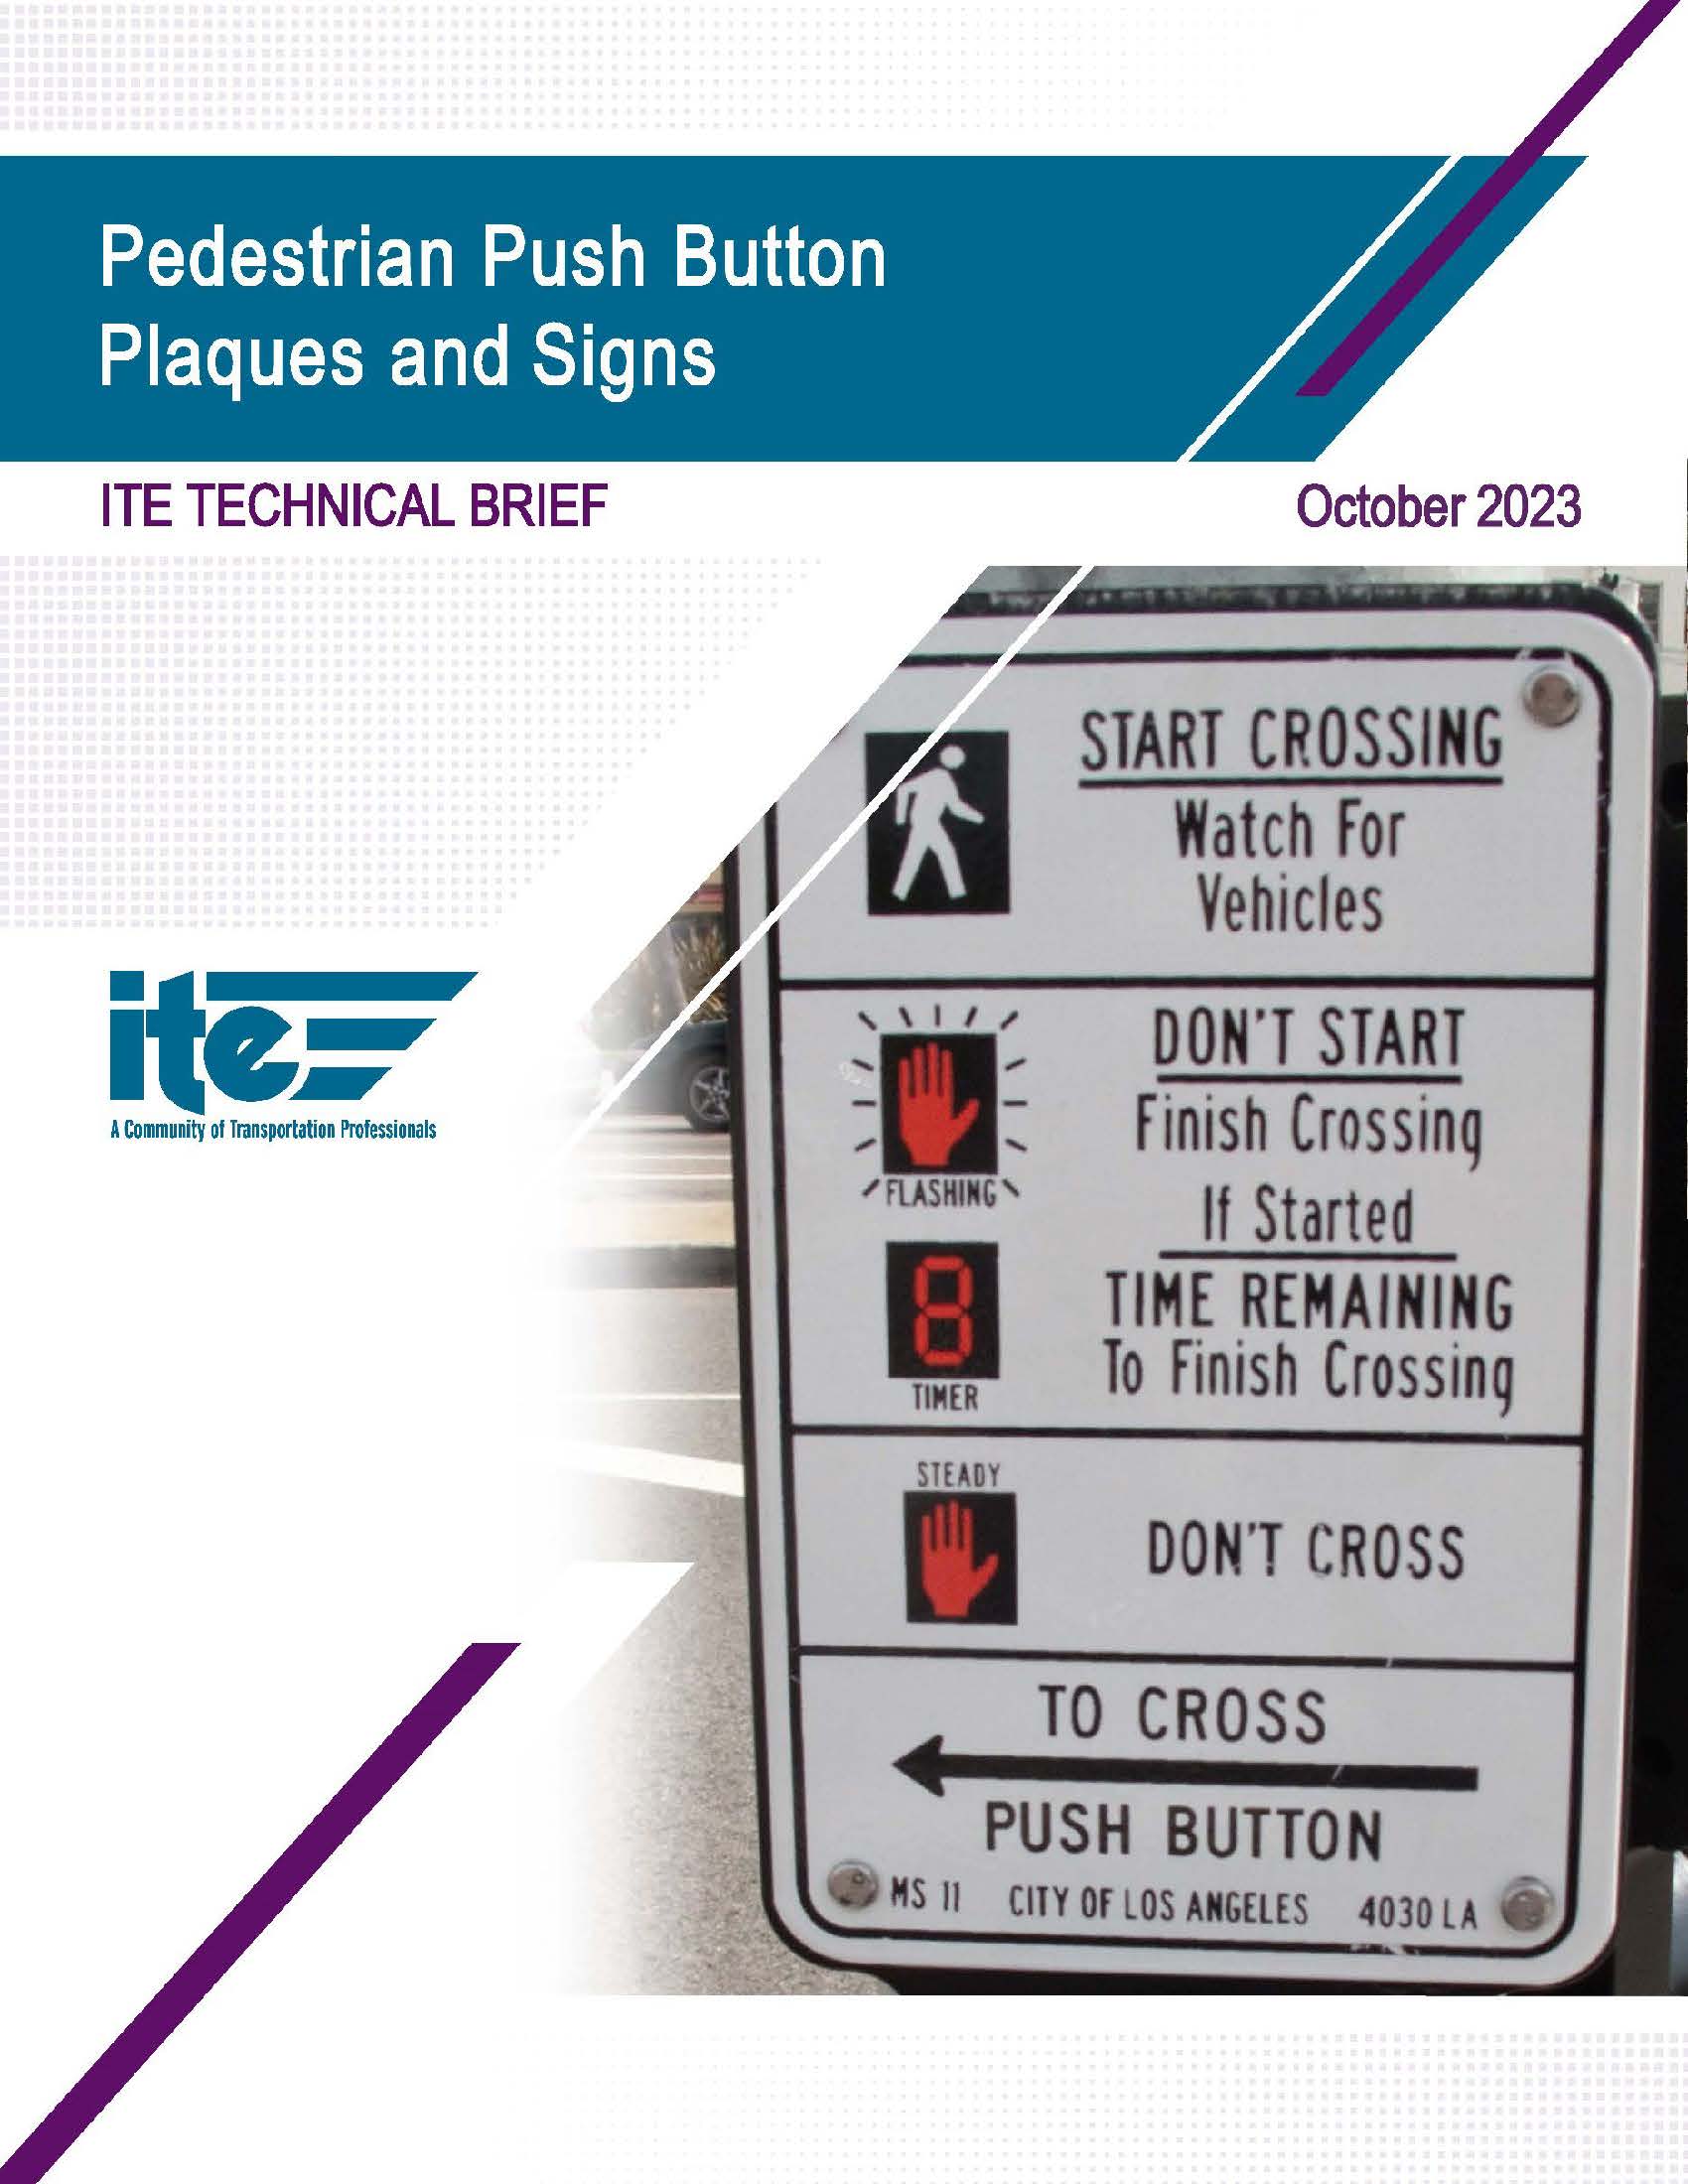 Pedestrian Push Button Plaques and Signs